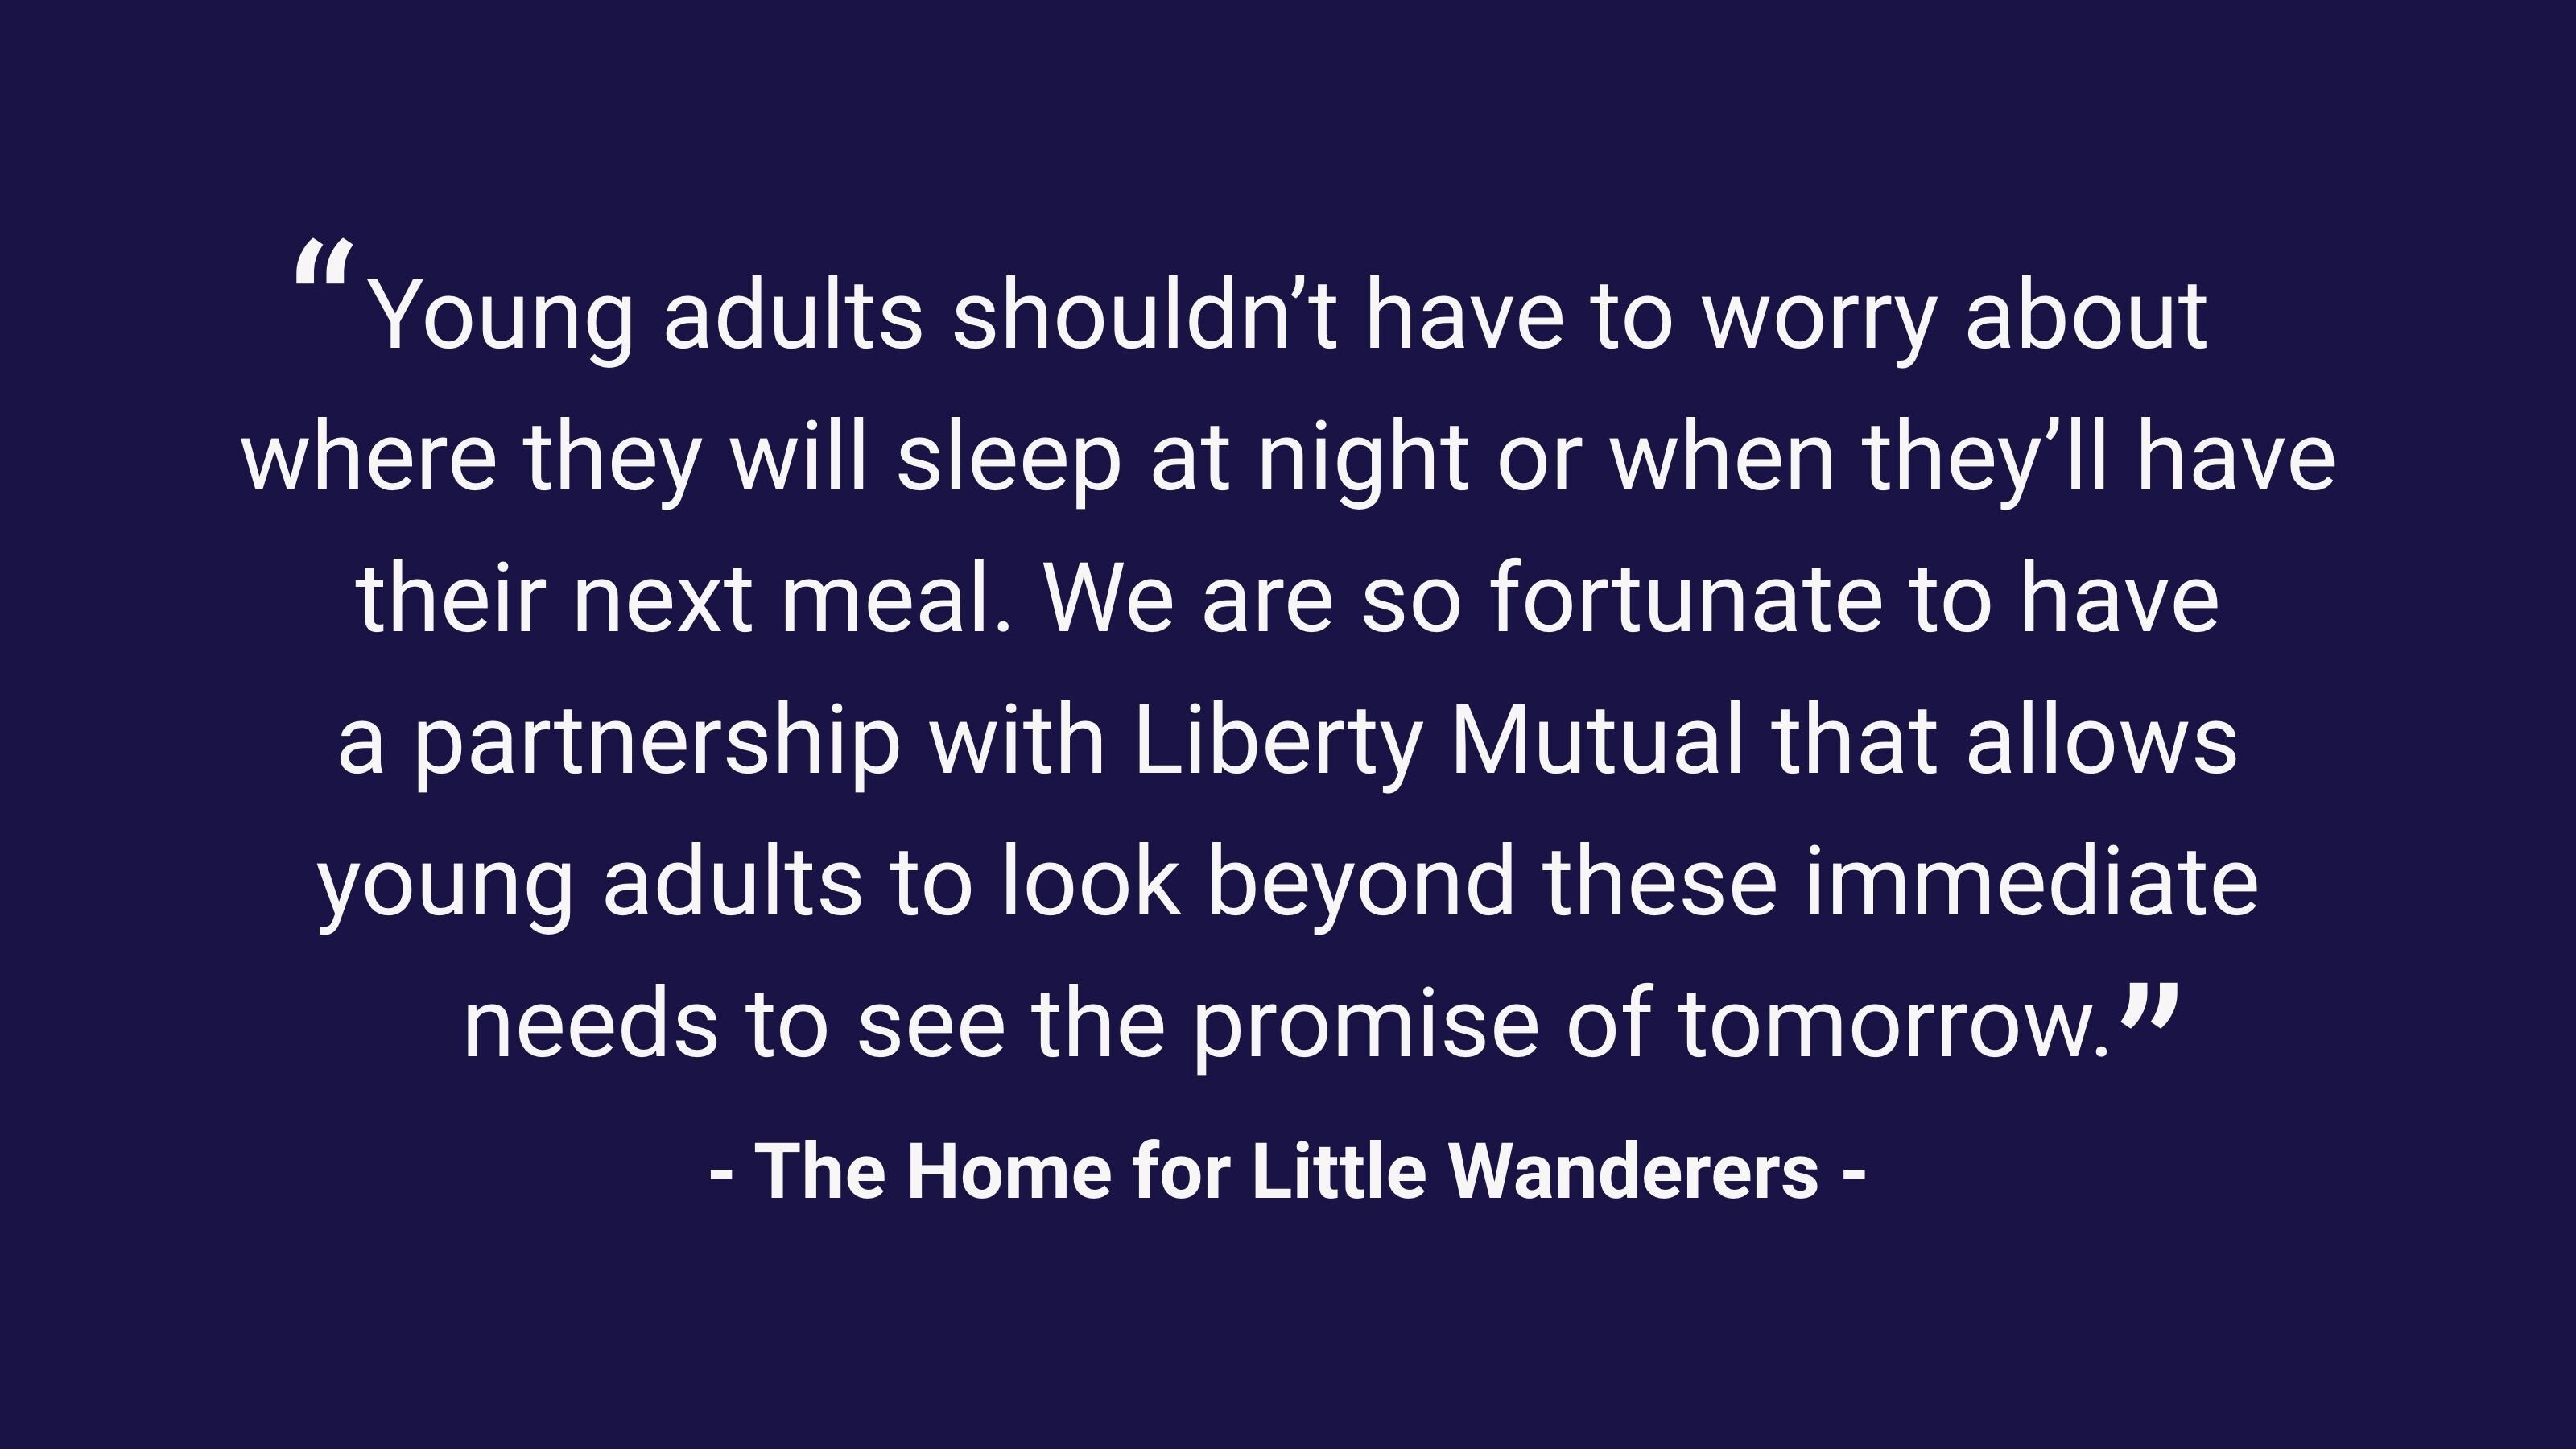 (slide 2 of 3) "Young adults shouldn't have to worry about where they will sleep at night or when they'll have their next meal. We are so fortunate to have a partnership with Liberty Mutual that allows young adults to look beyond these immediate needs to see the promise of tomorrow." - The Home for Little Wanderers. 